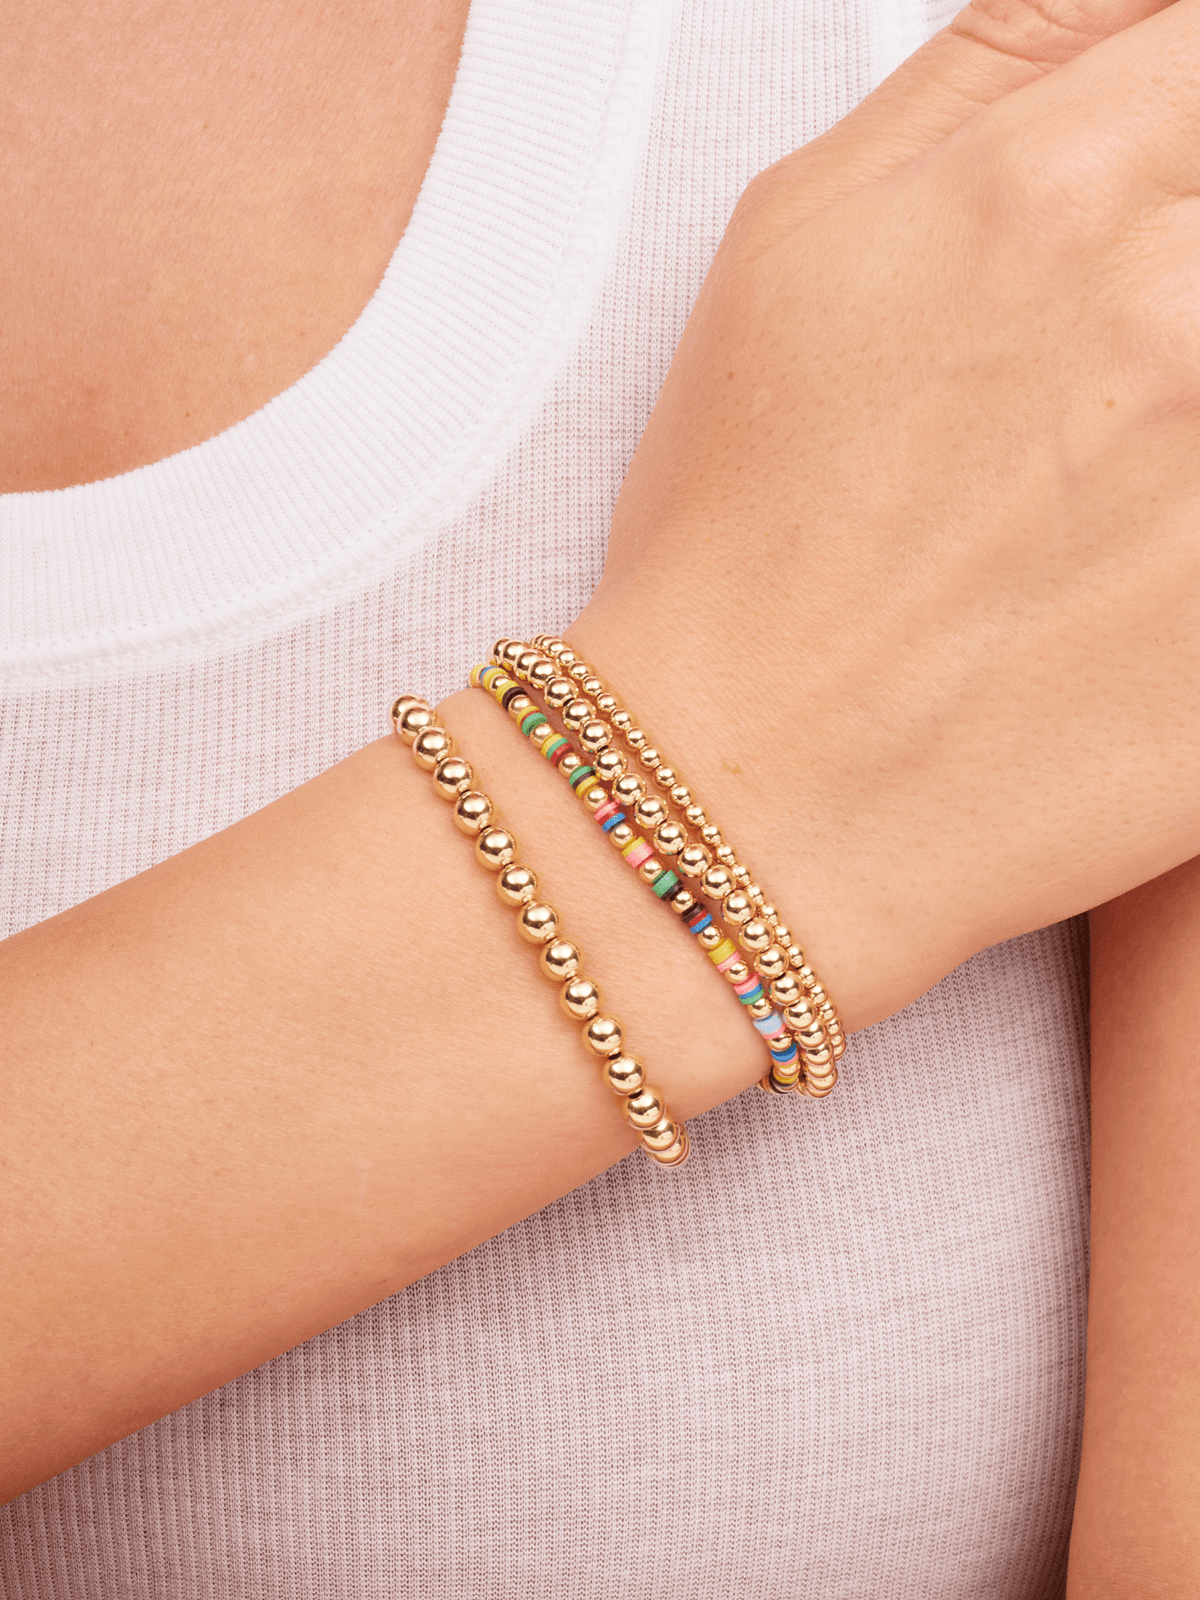 Gold bead stretch bracelets paired with colorful beaded stretch bracelet on model wrist